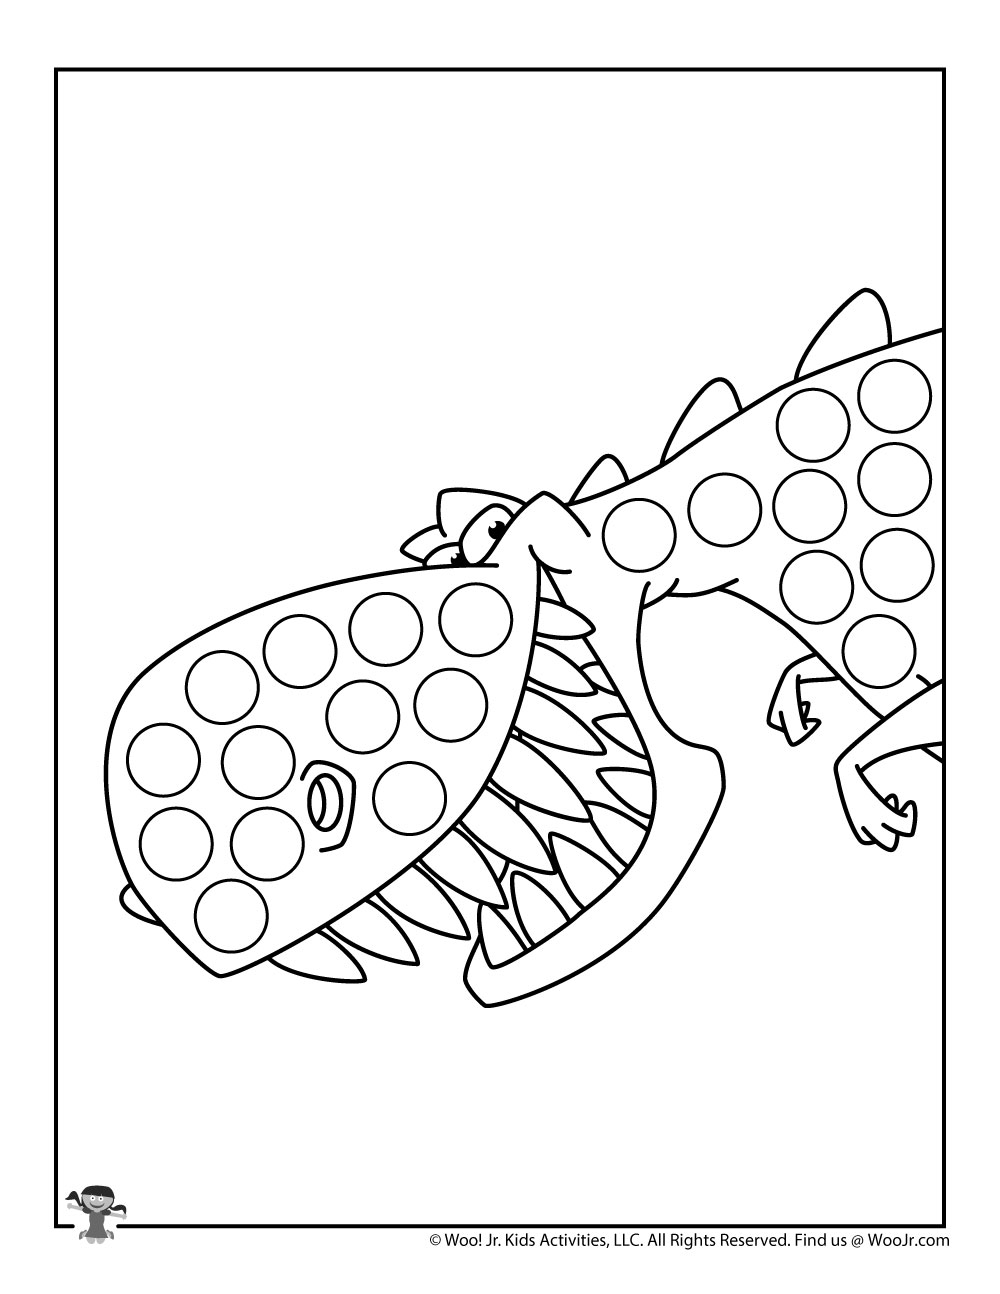 Free Printable Do a Dot Coloring Page | Woo! Jr. Kids Activities :  Children's Publishing